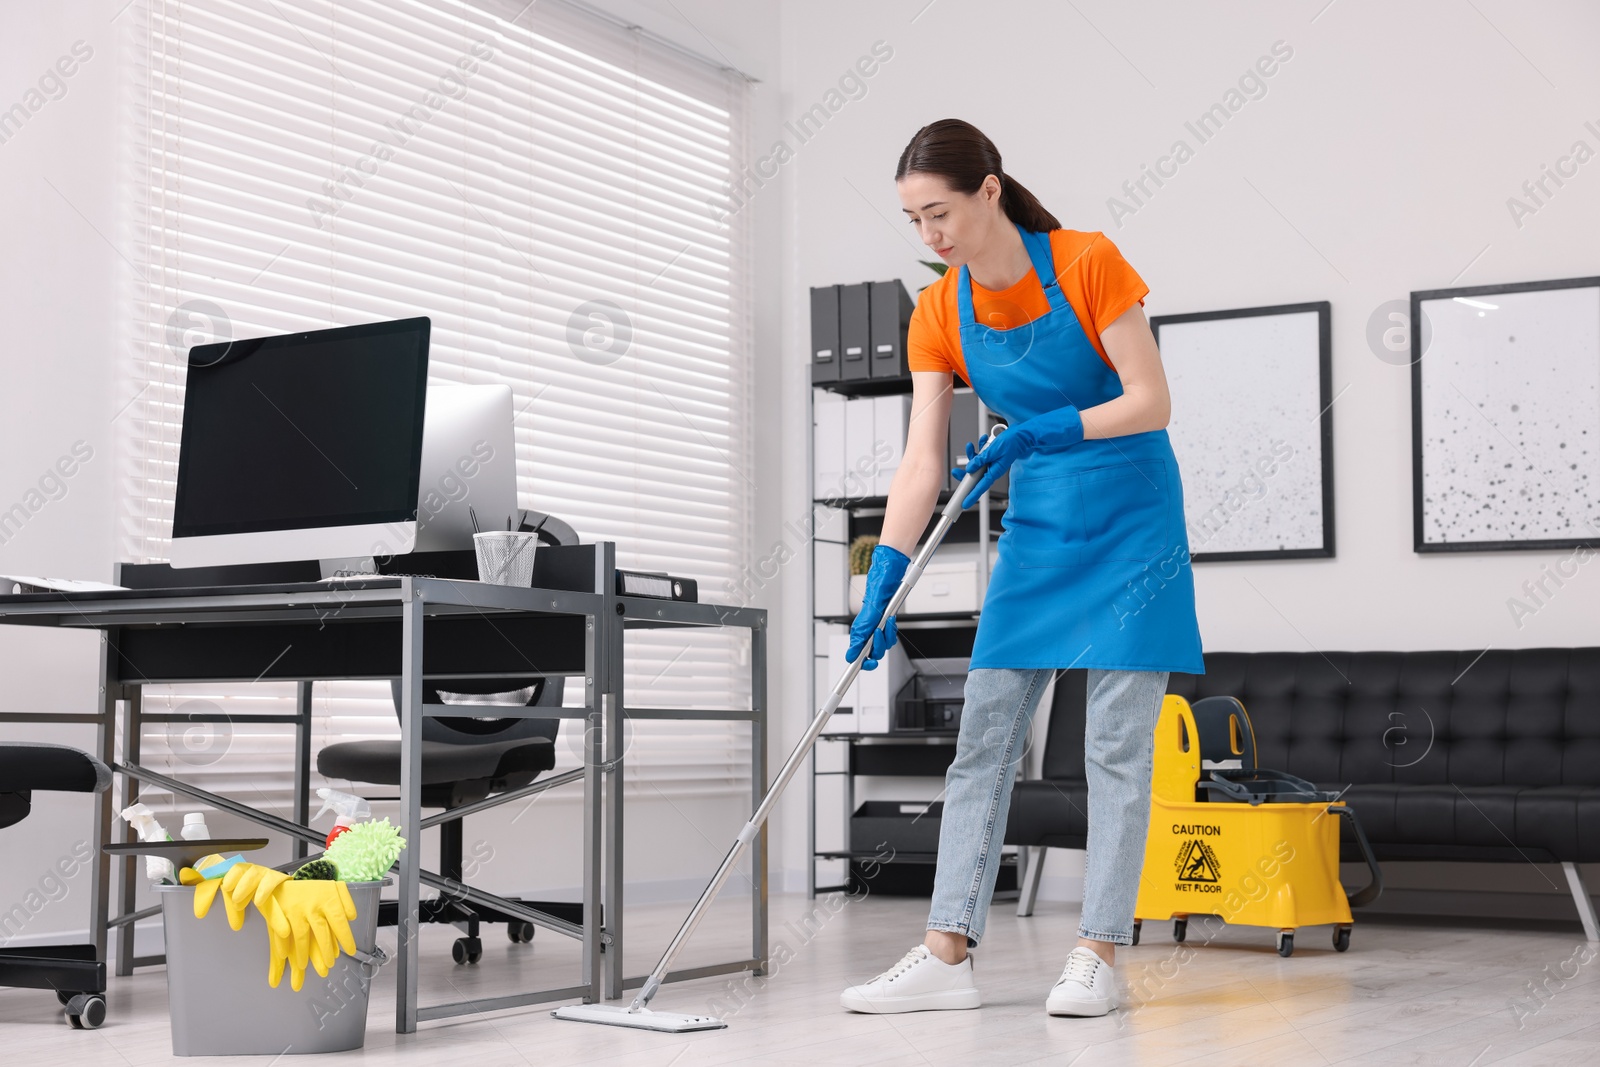 Photo of Cleaning service worker washing floor with mop. Bucket with supplies and wet floor sign in office